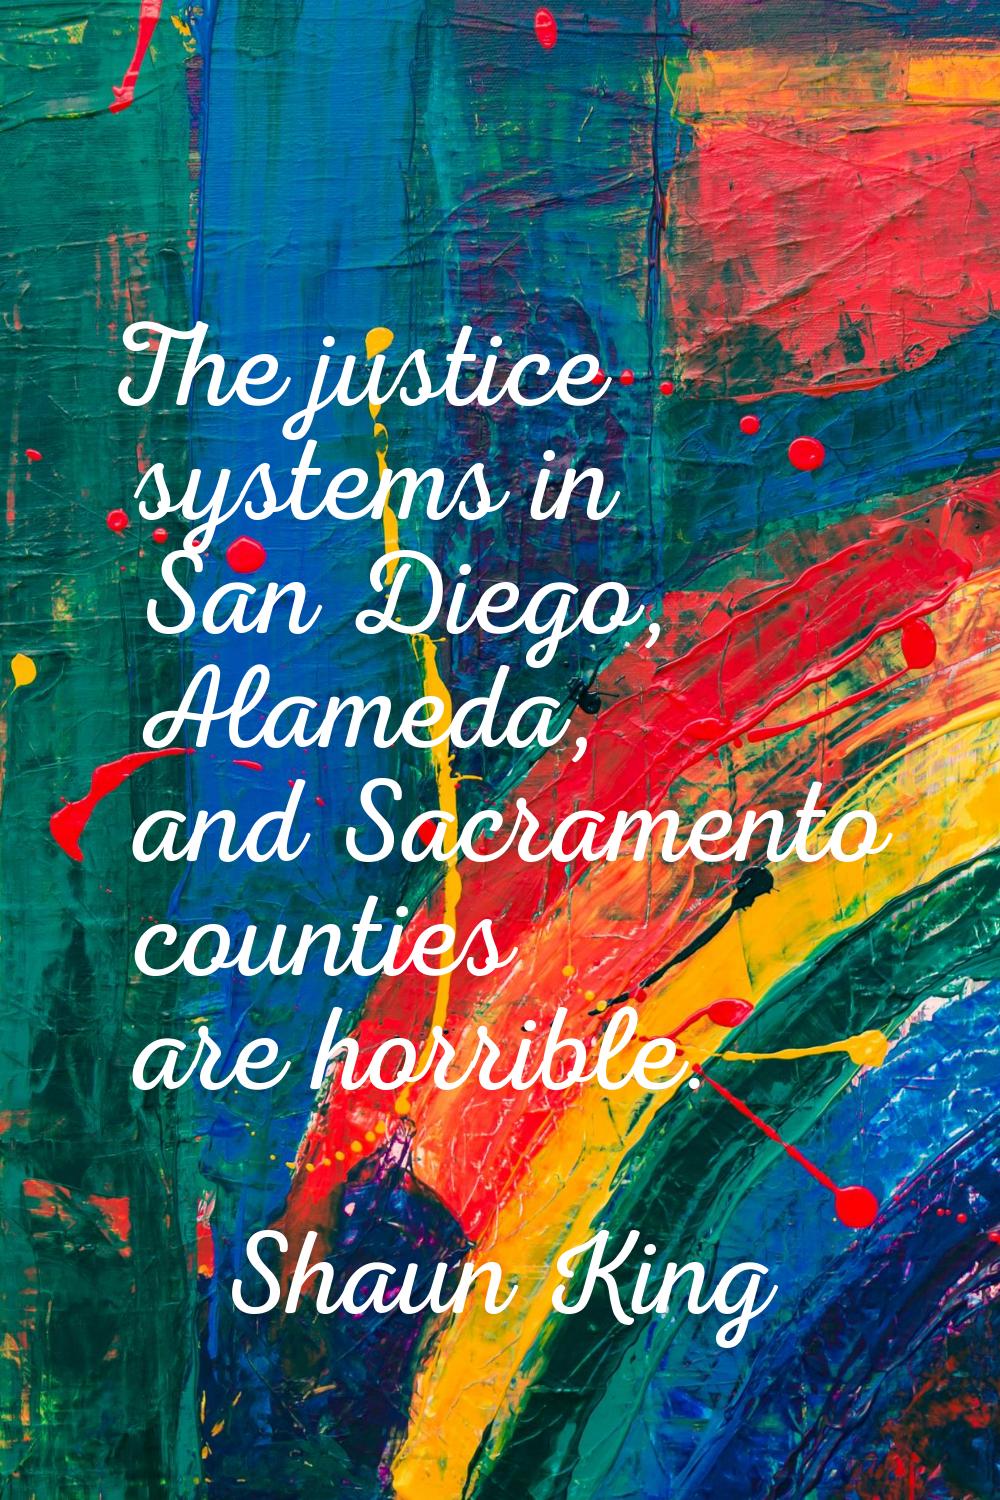 The justice systems in San Diego, Alameda, and Sacramento counties are horrible.